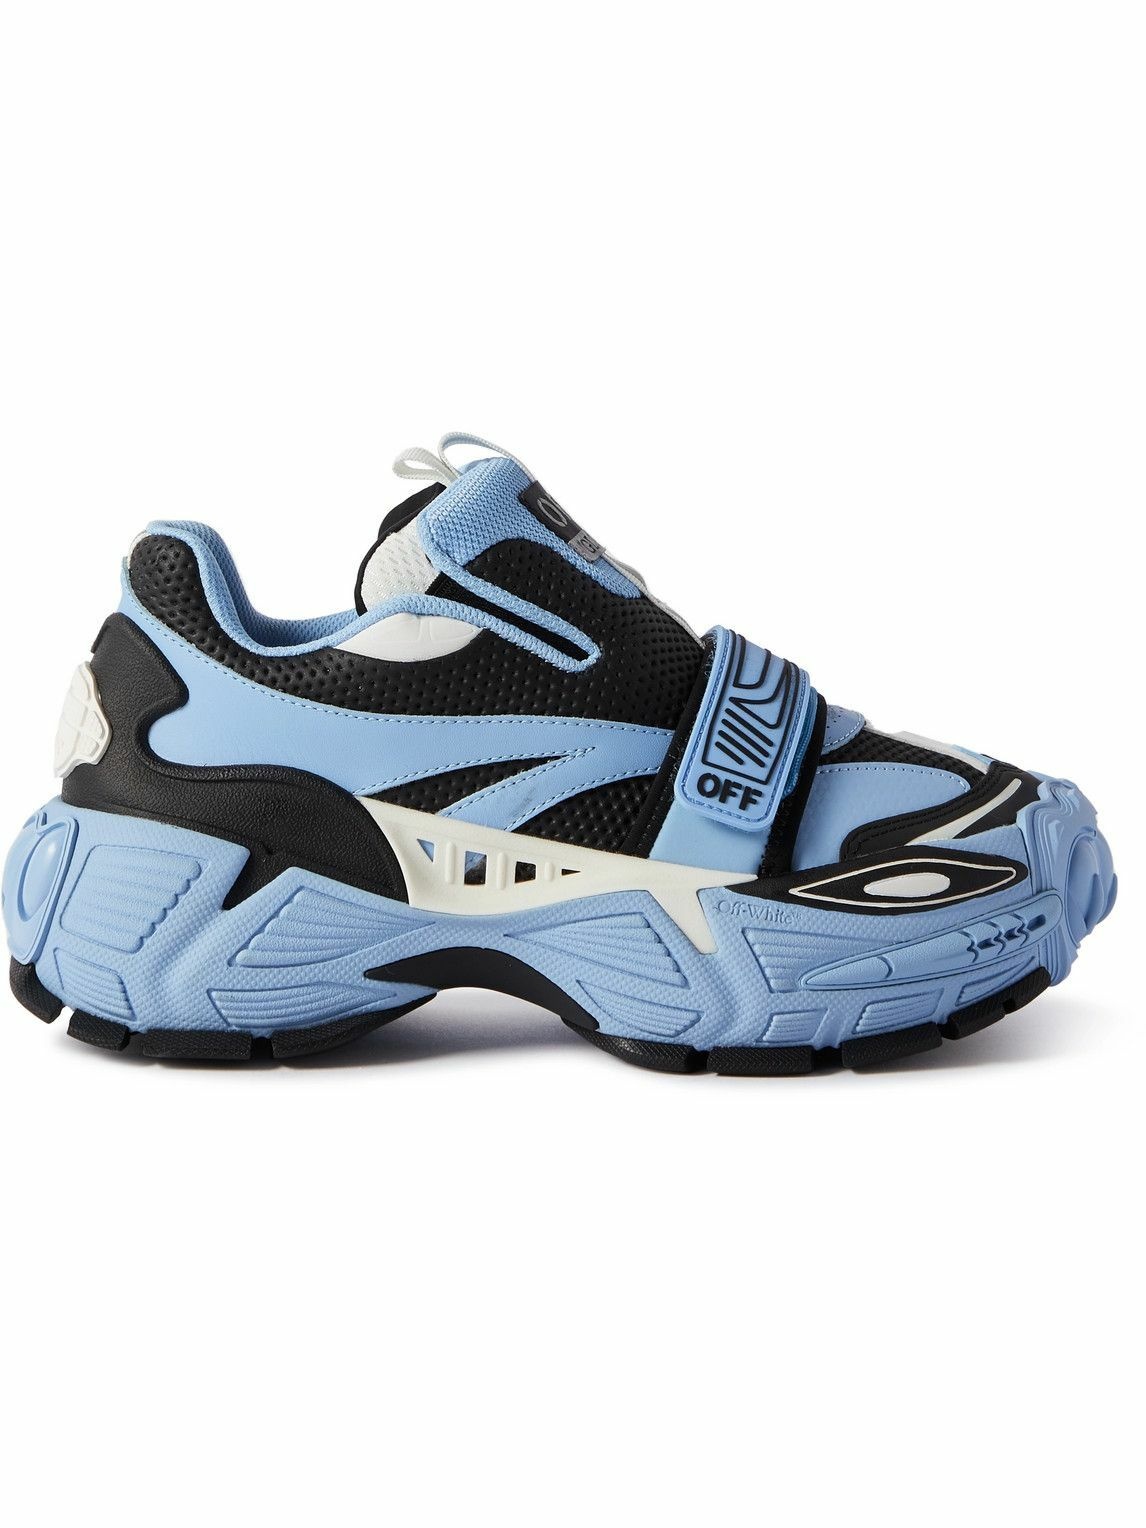 Off-White - Glove Leather and Mesh Sneakers - Blue Off-White